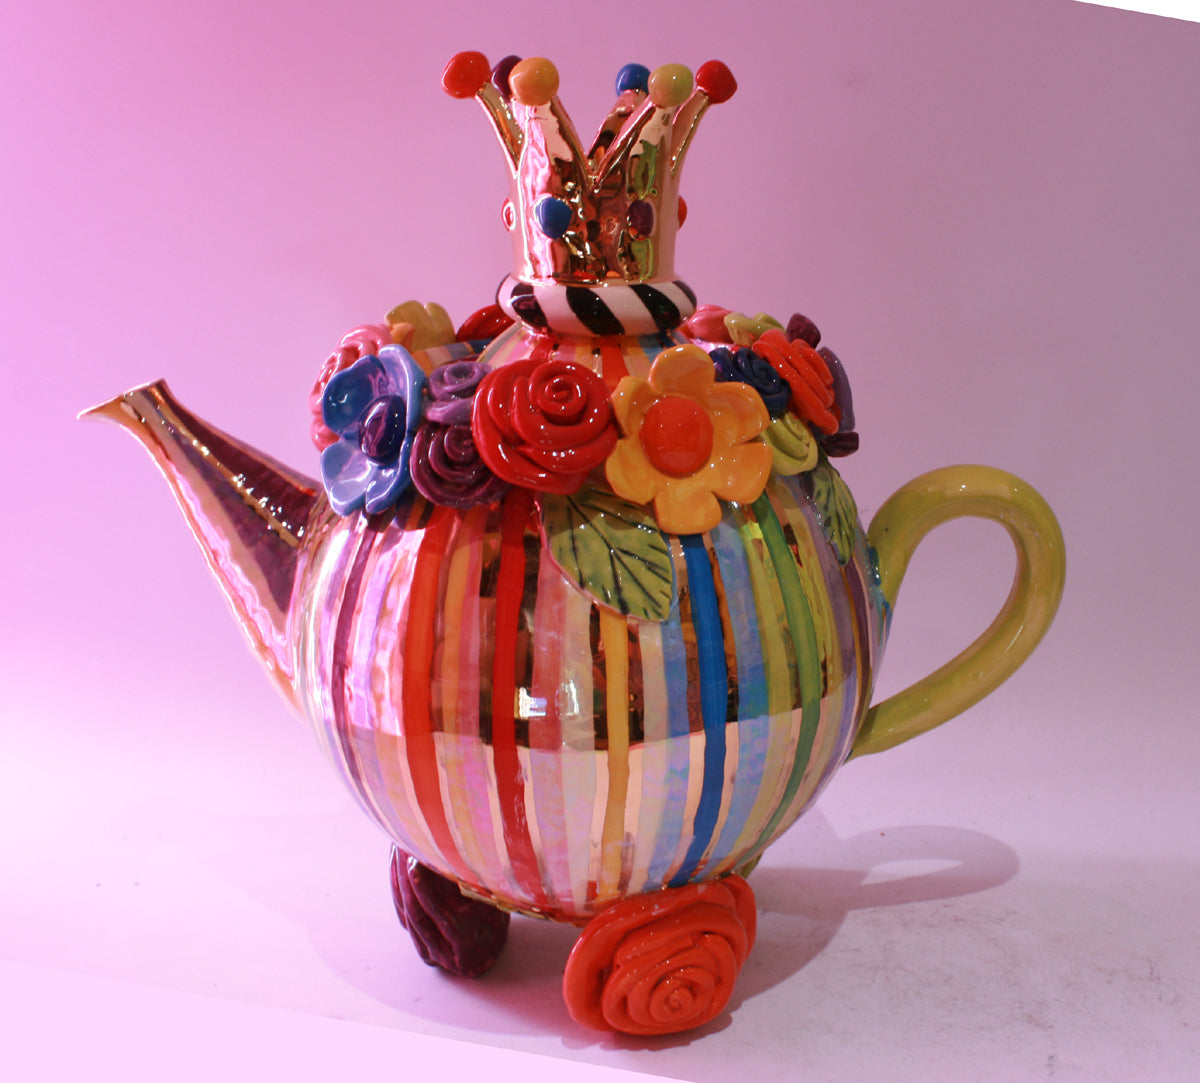 Giant Encrusted Teapot on 3 Rose Feet - MaryRoseYoung